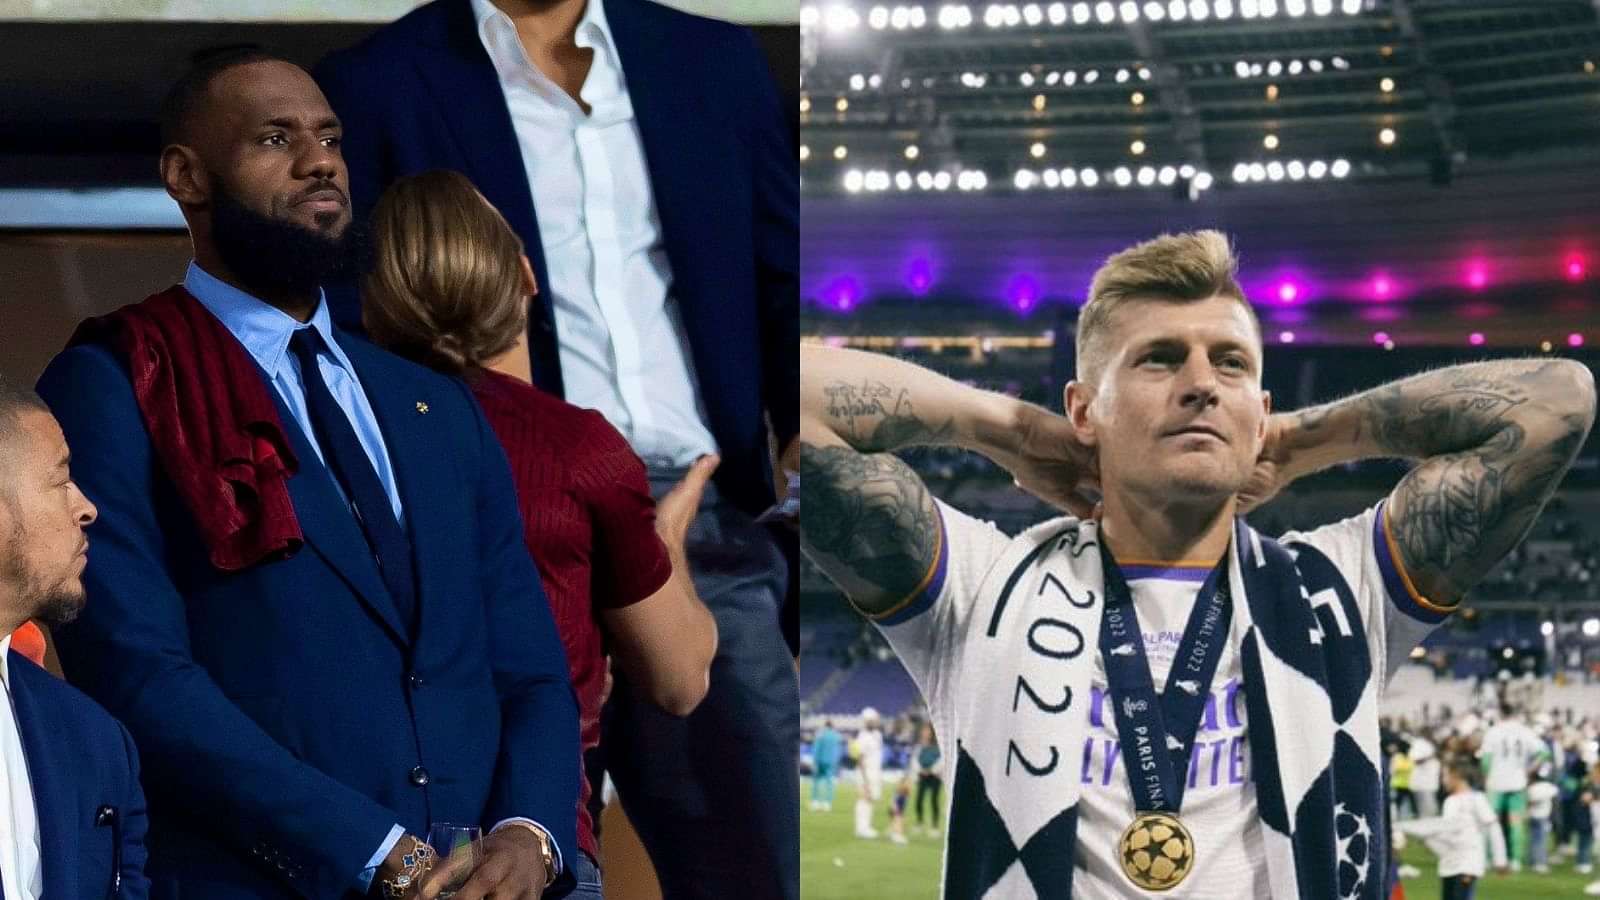 "Hey, LeBron James! Don't worry about that game too much, Liverpool in 7!!": Fans roast Lakers superstar after Real Madrid won UEFA Champions league